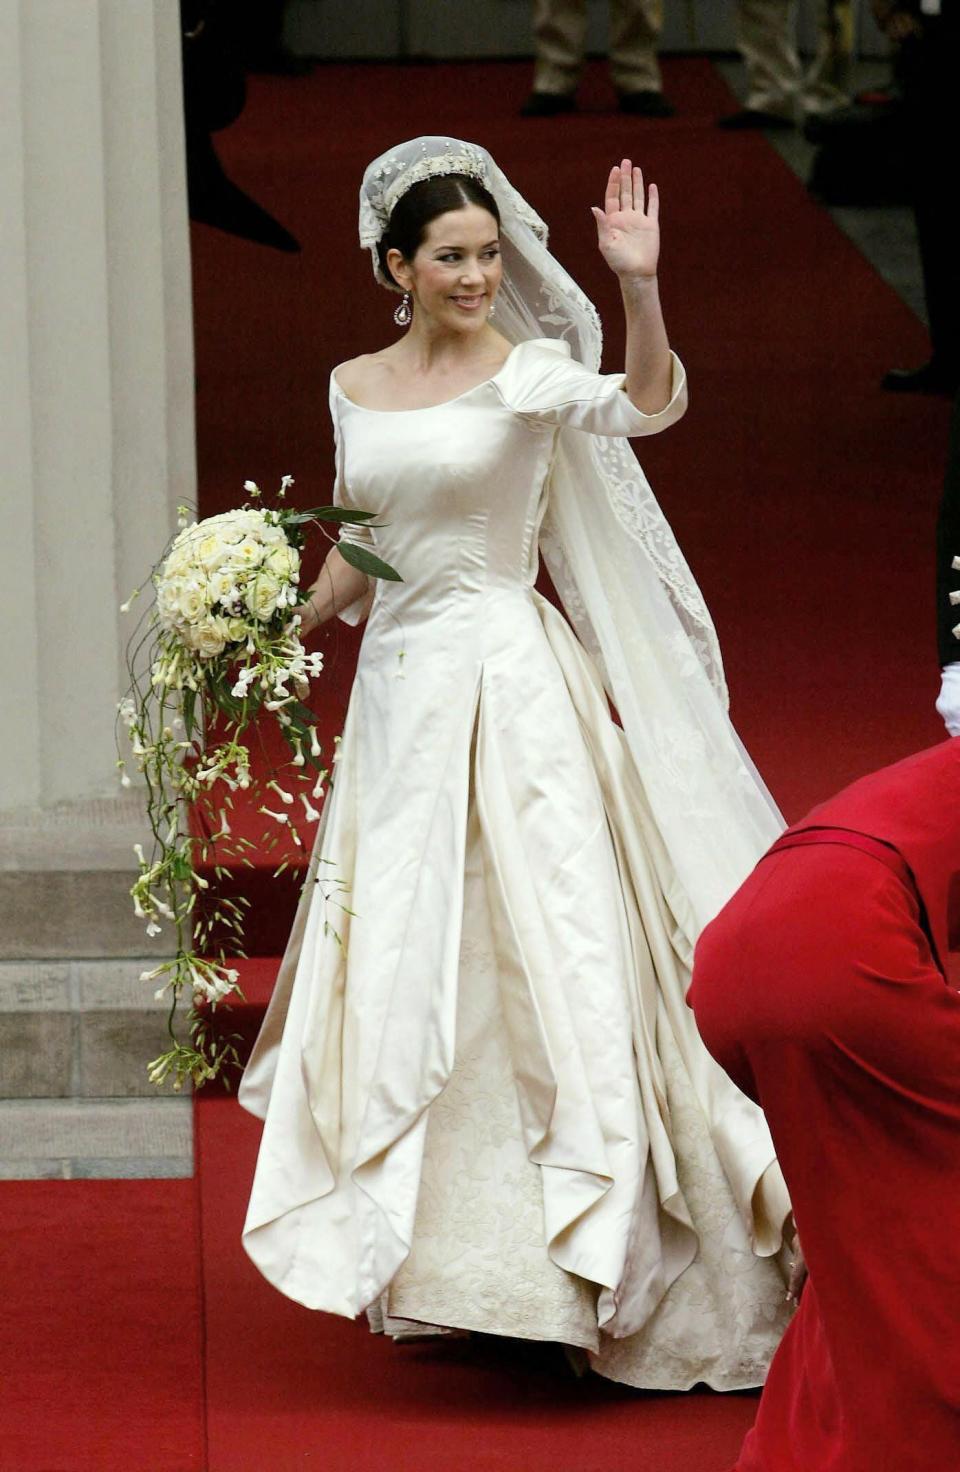 Mary Donaldson in her wedding dress